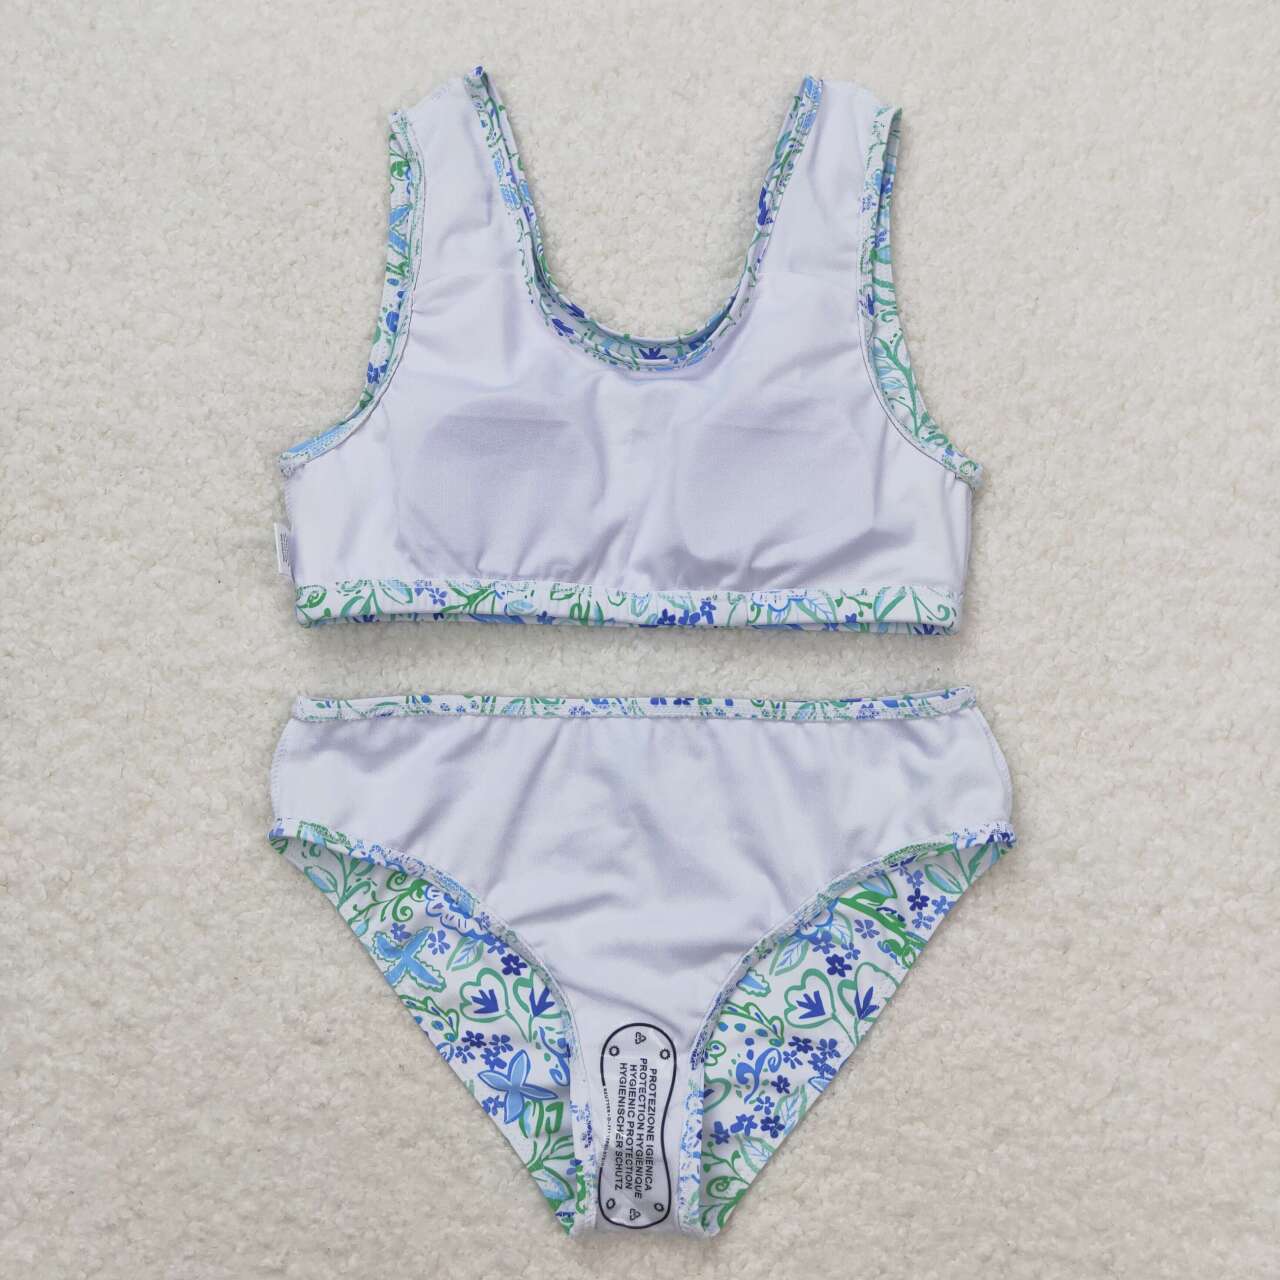 S0279 Floral blue and white lace bathing suit